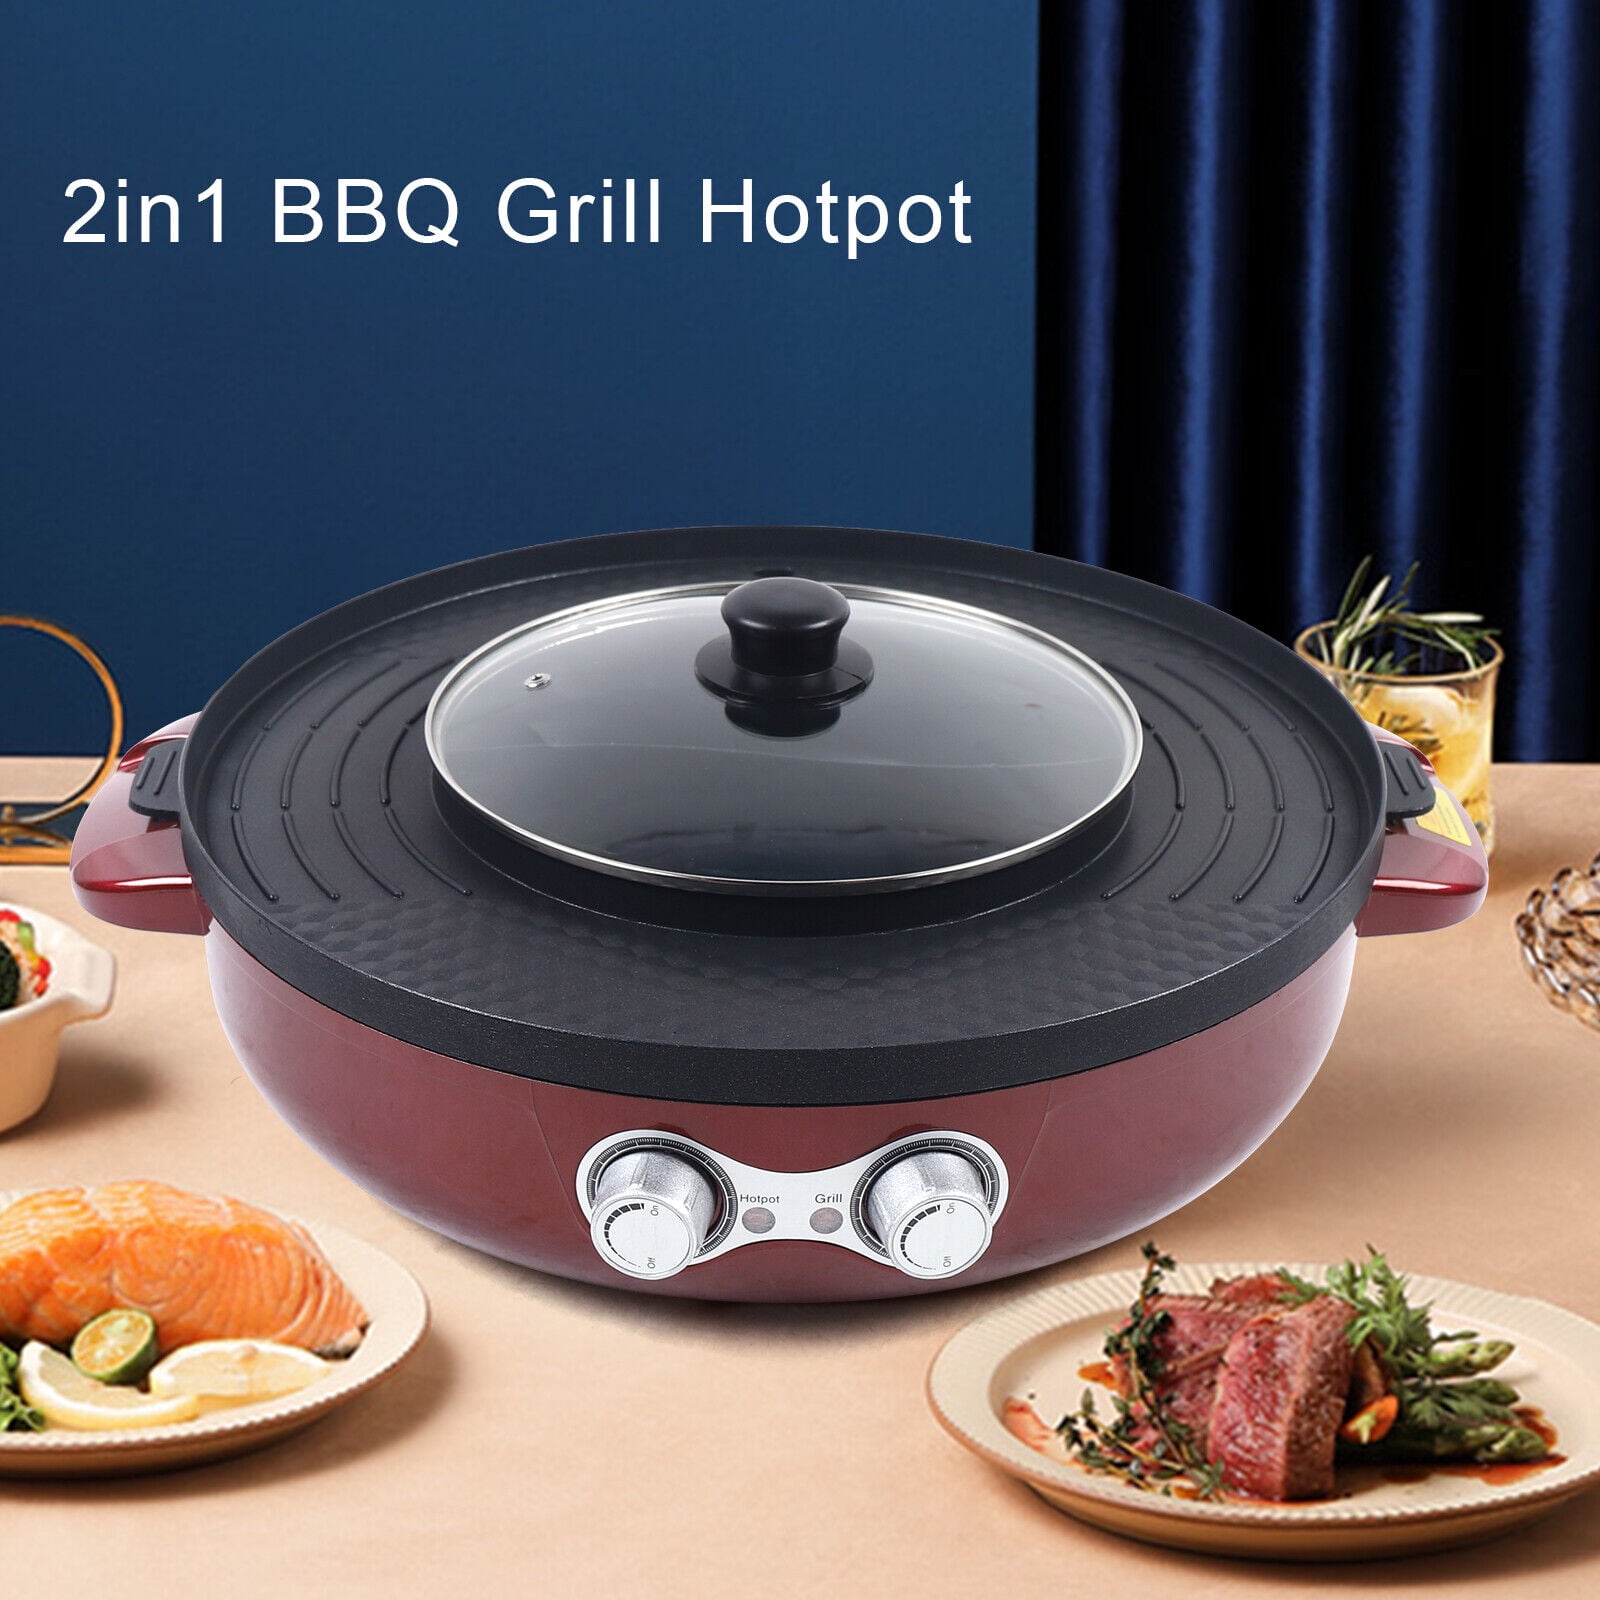 I found this Electric Grill with Hot Pot at The Best Shop inside